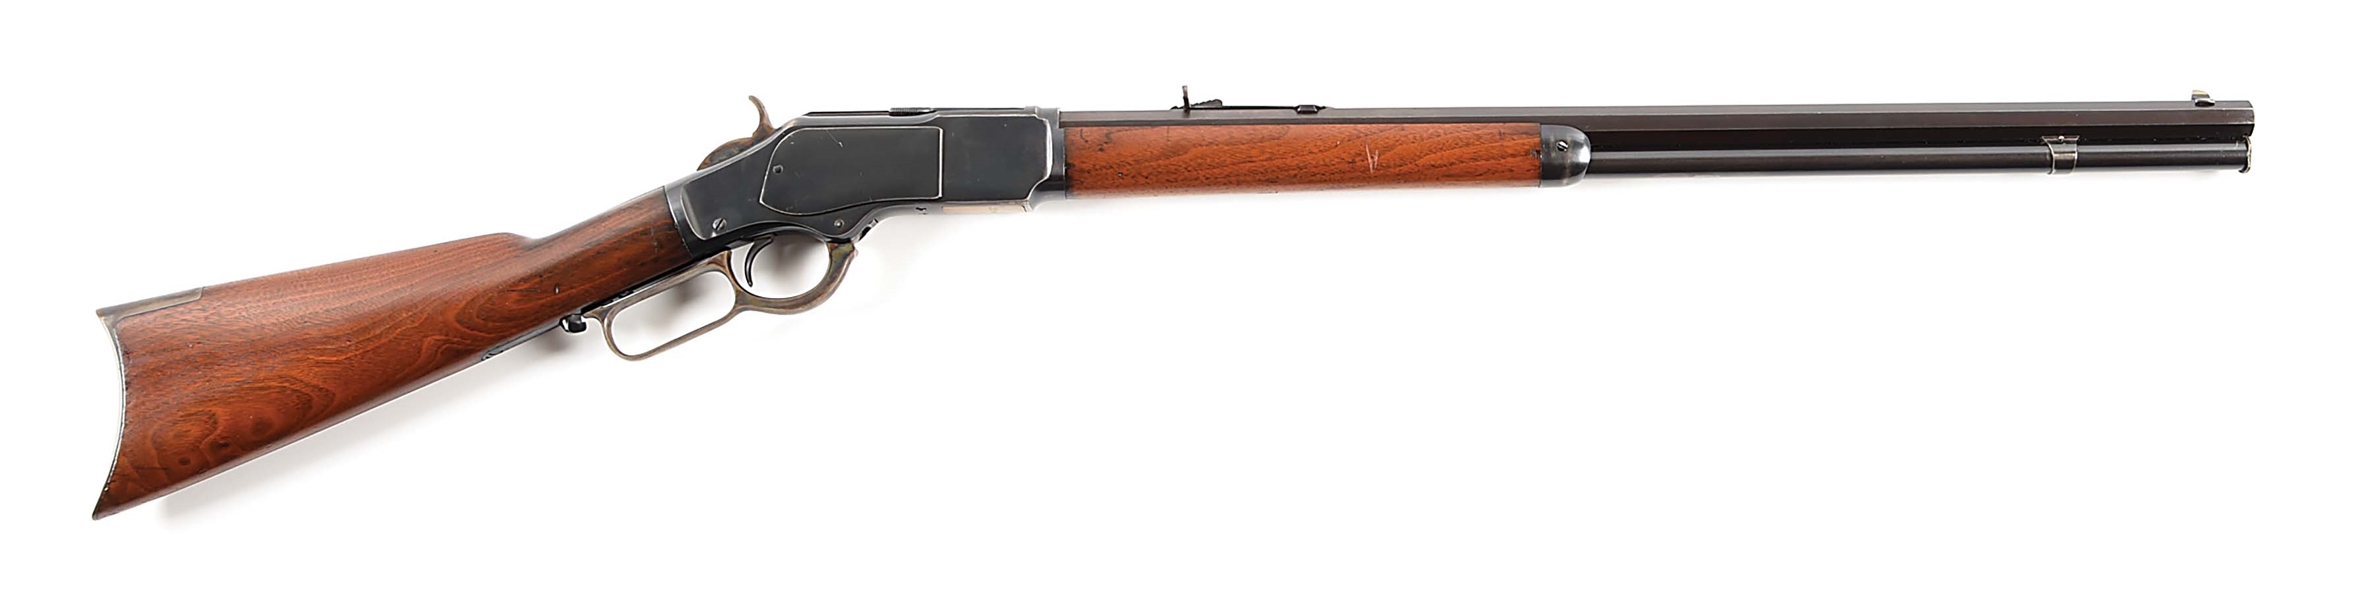 (A) ATTRACTIVELY RESTORED WINCHESTER MODEL 1873 .22 RIMFIRE LEVER ACTION RIFLE.